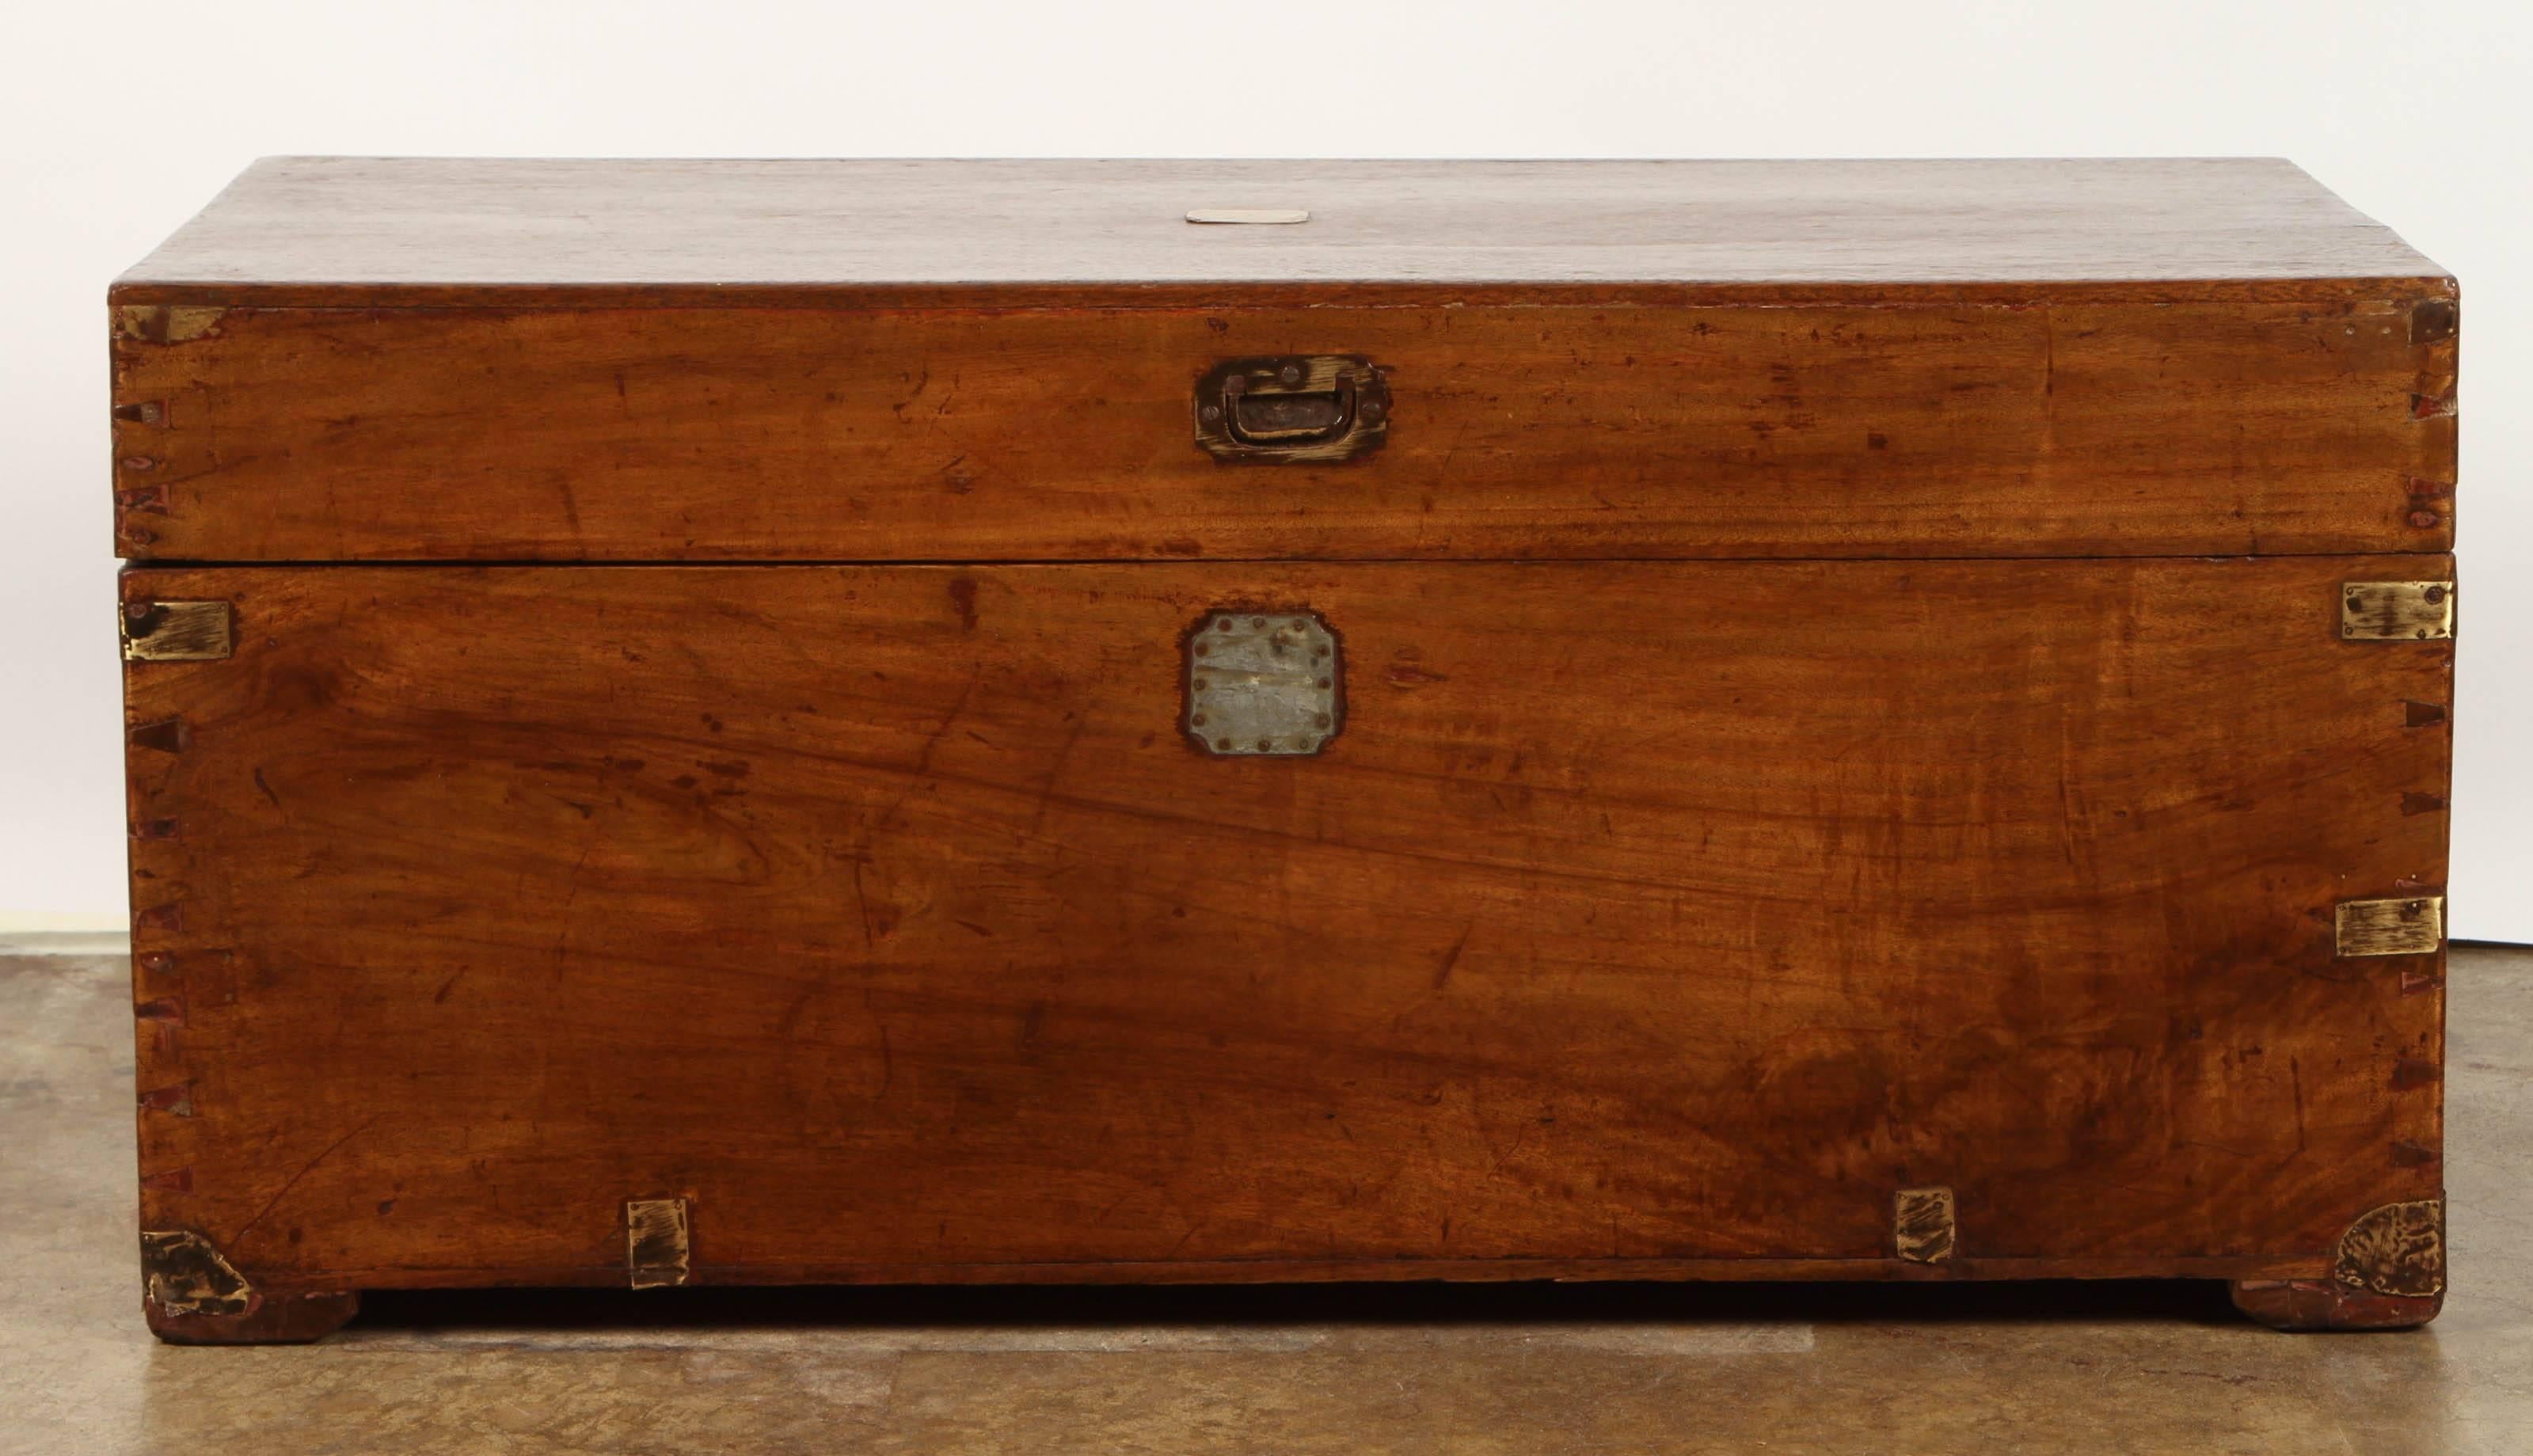 Solid Chinese Camphor wood trunk with Brass Fittings, including handles, and escutcheons.